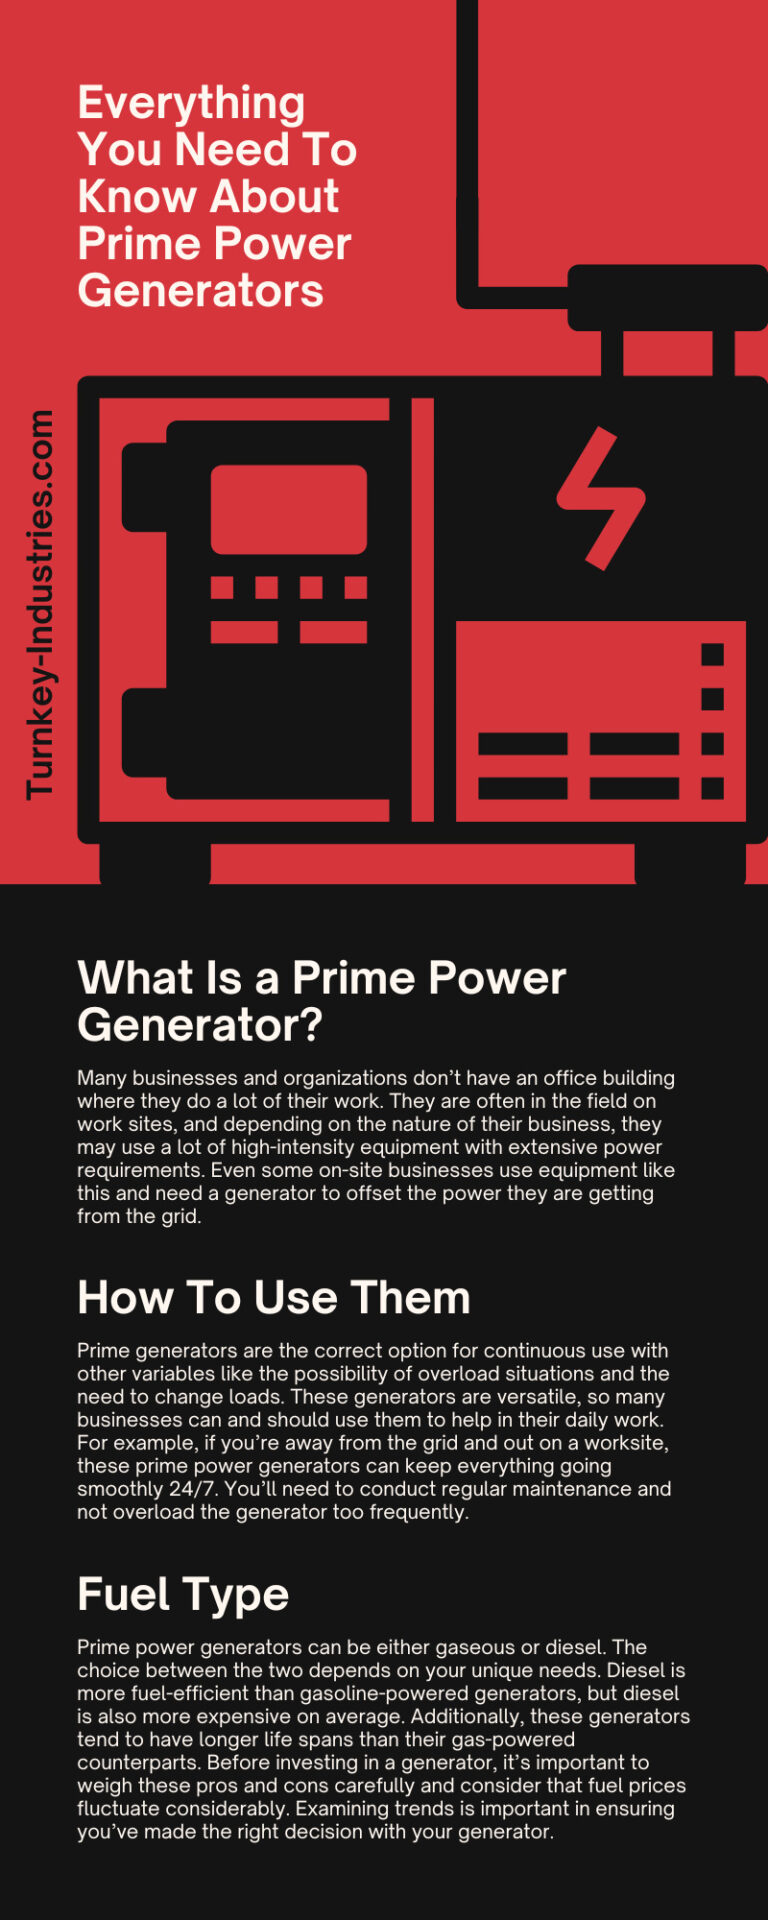 Everything You Need To Know About Prime Power Generators